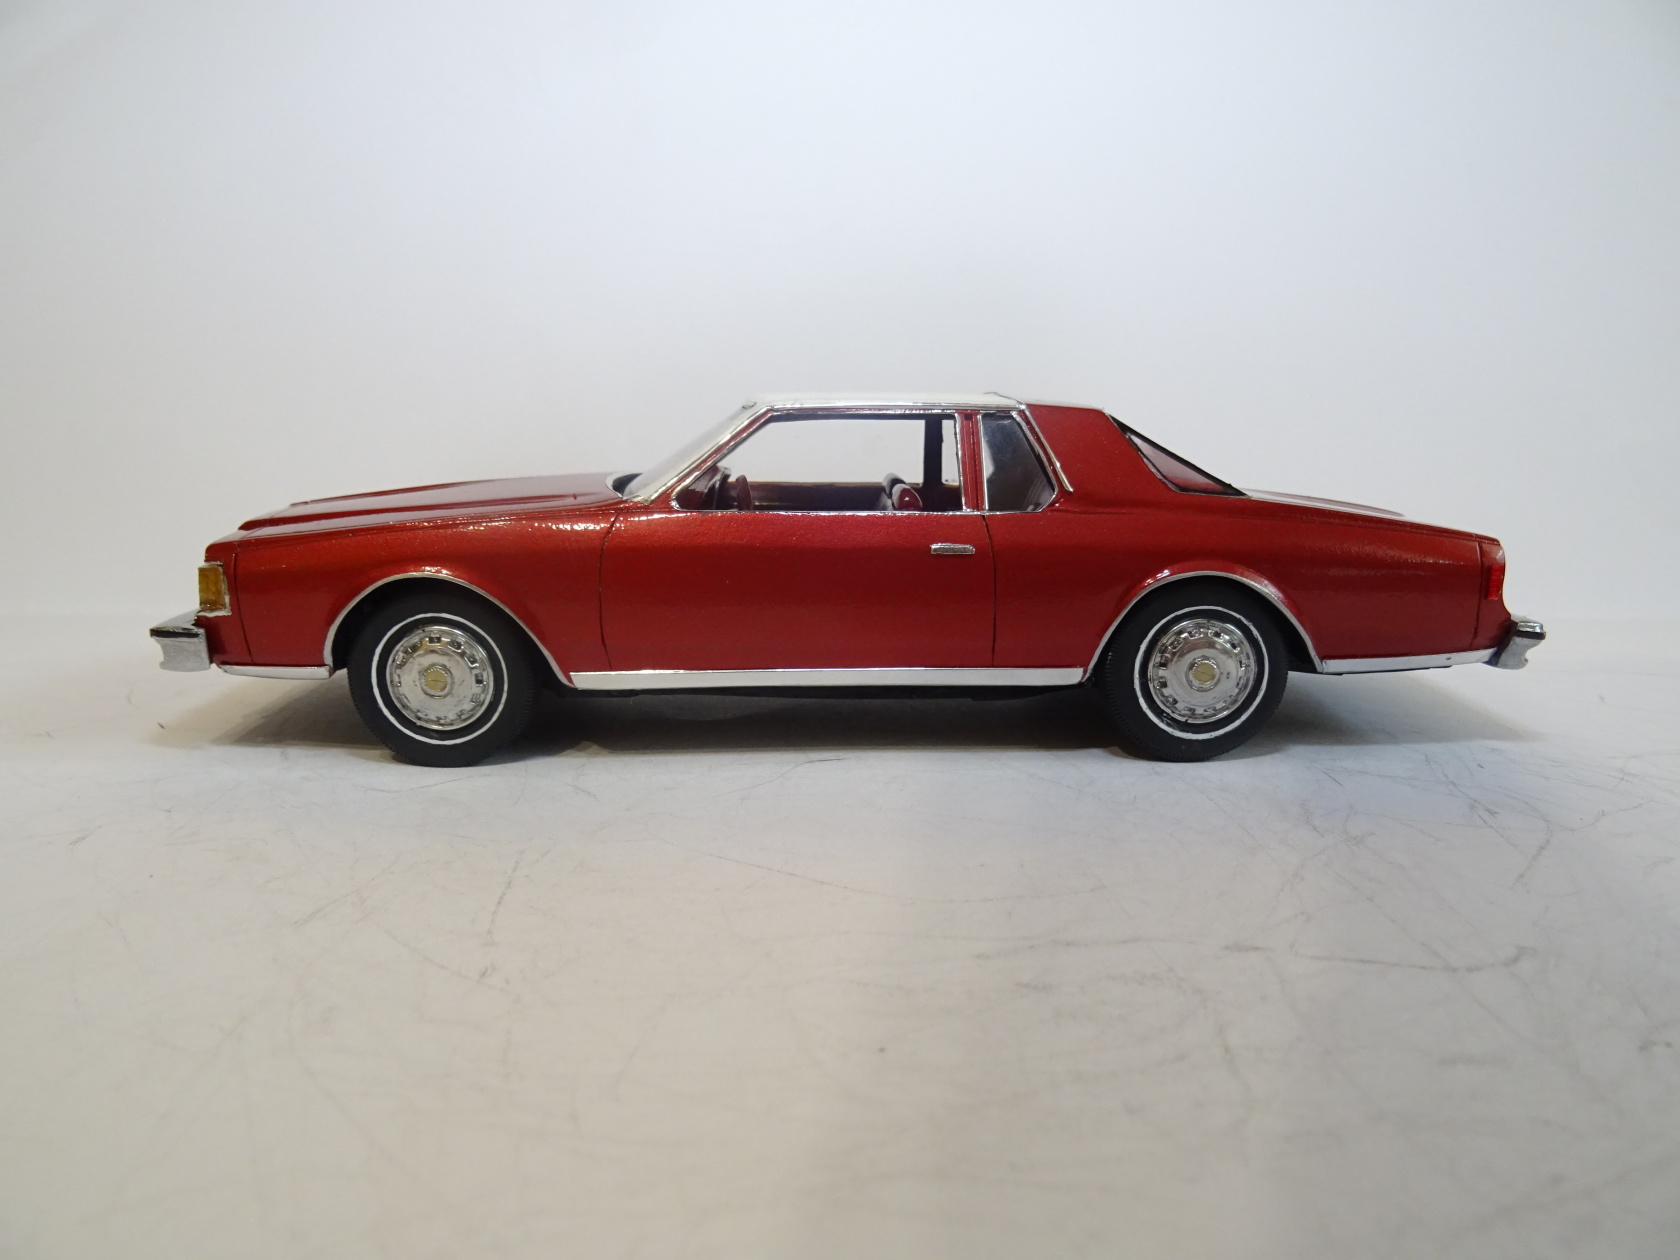 77 Chevy Caprice Classic coupe - Model Cars - Model Cars Magazine Forum